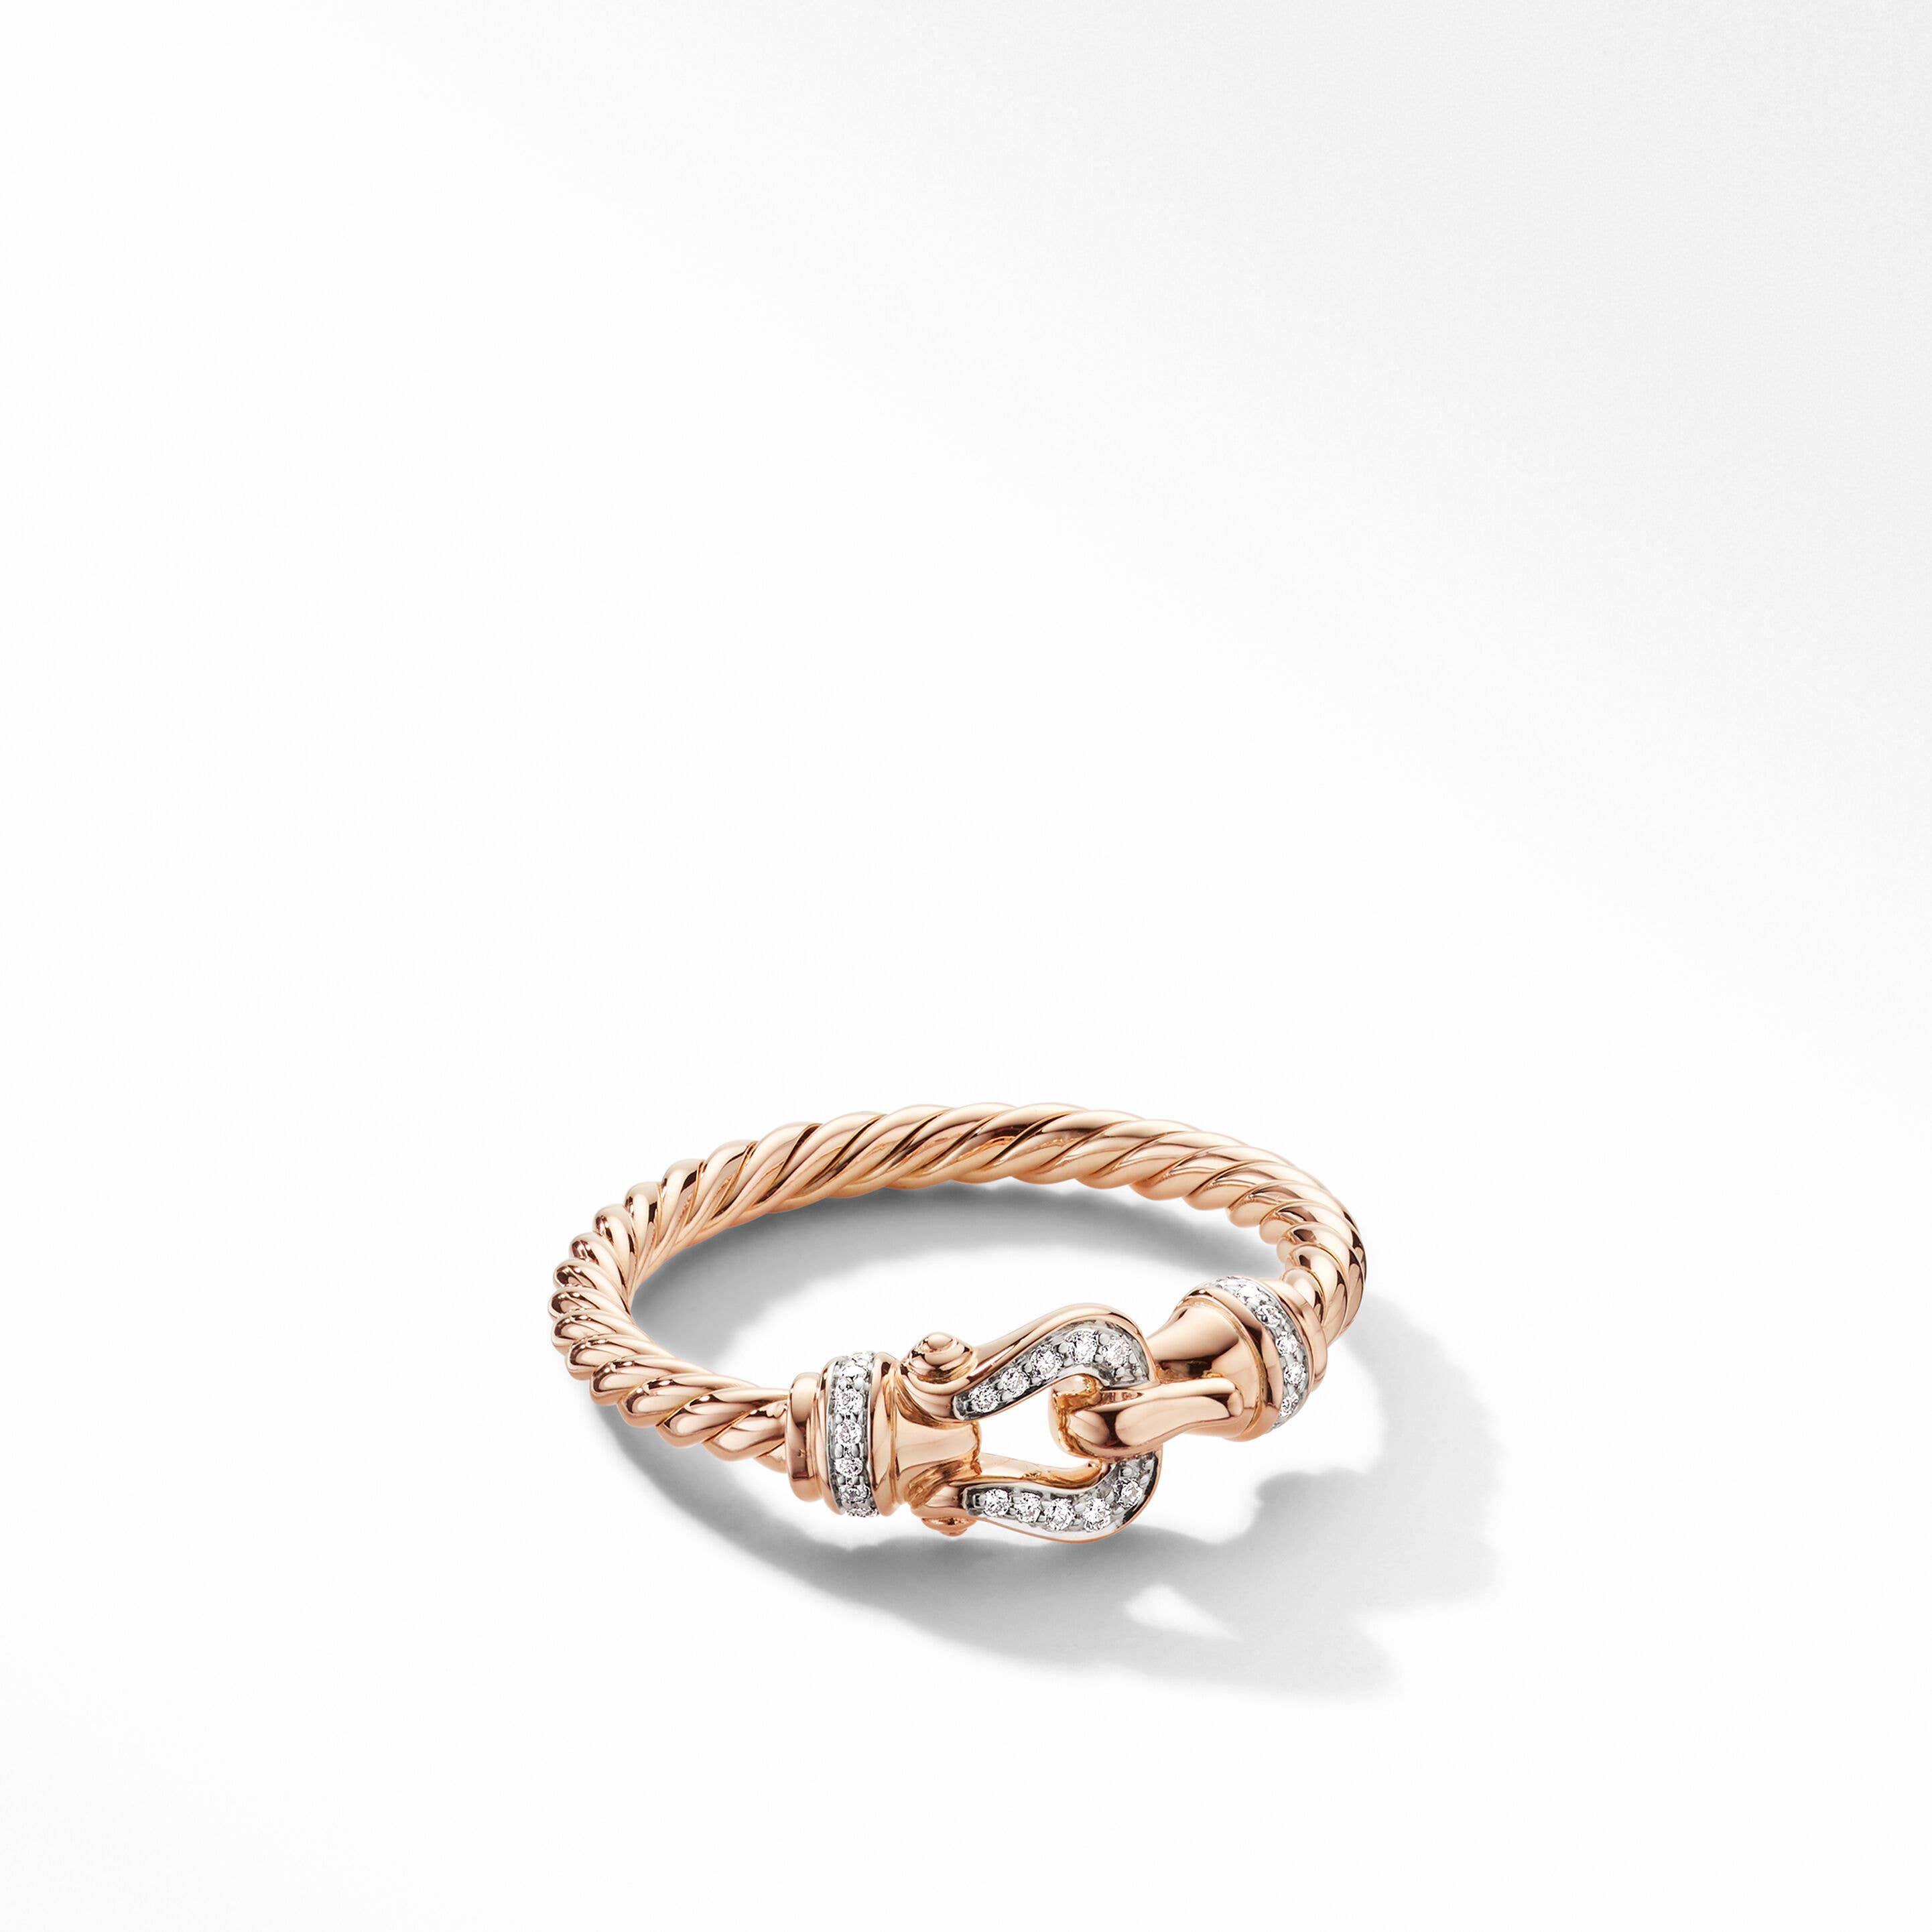 Petite Buckle Ring in 18K Rose Gold with Pavé Diamonds